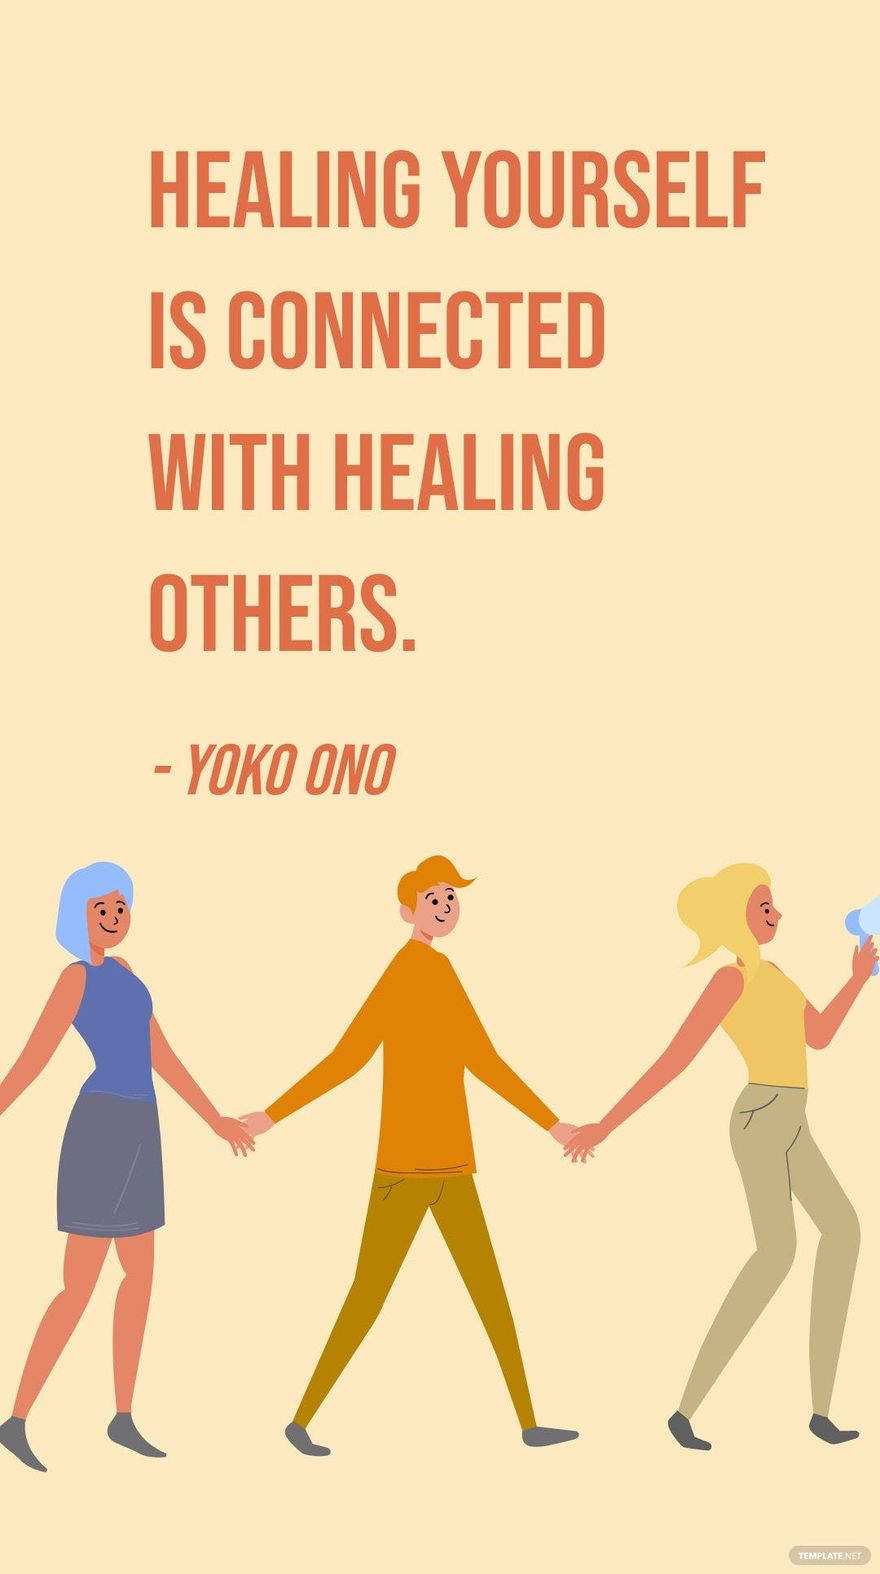 Free Yoko Ono - Healing yourself is connected with healing others. in JPG